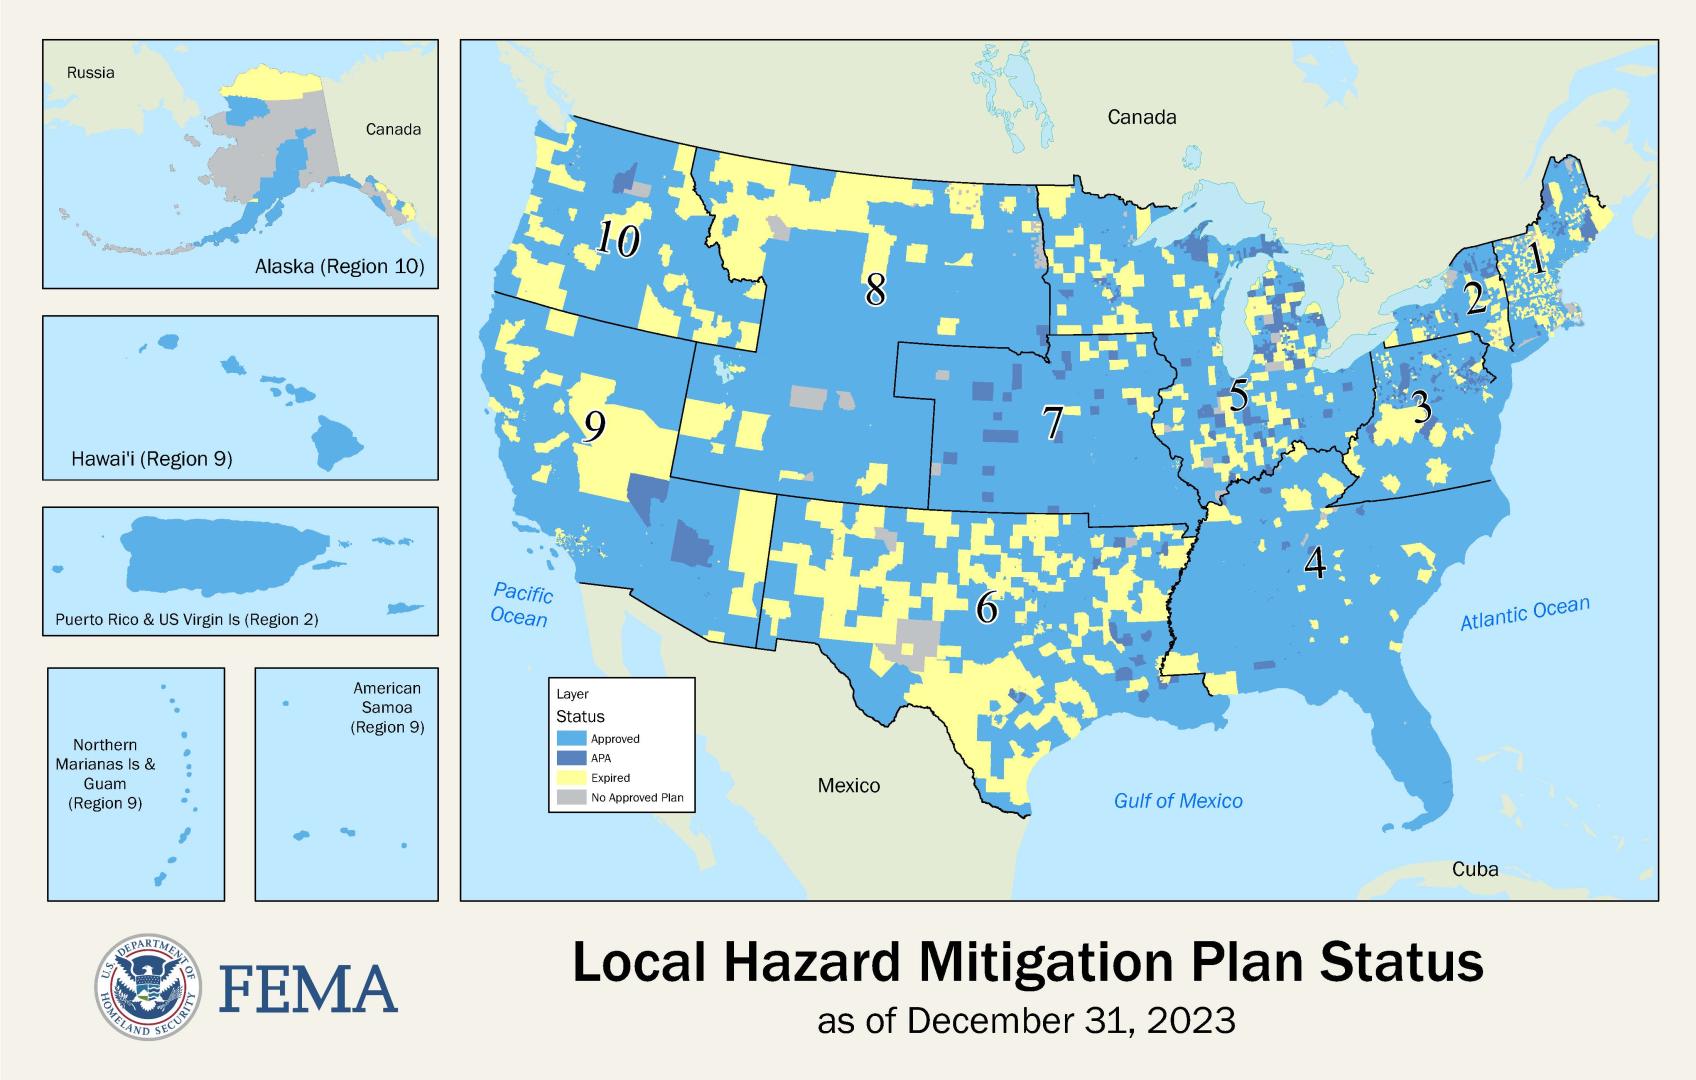 This map of the United States shows the jurisdictions with hazard mitigation plans as of 12/21/23.